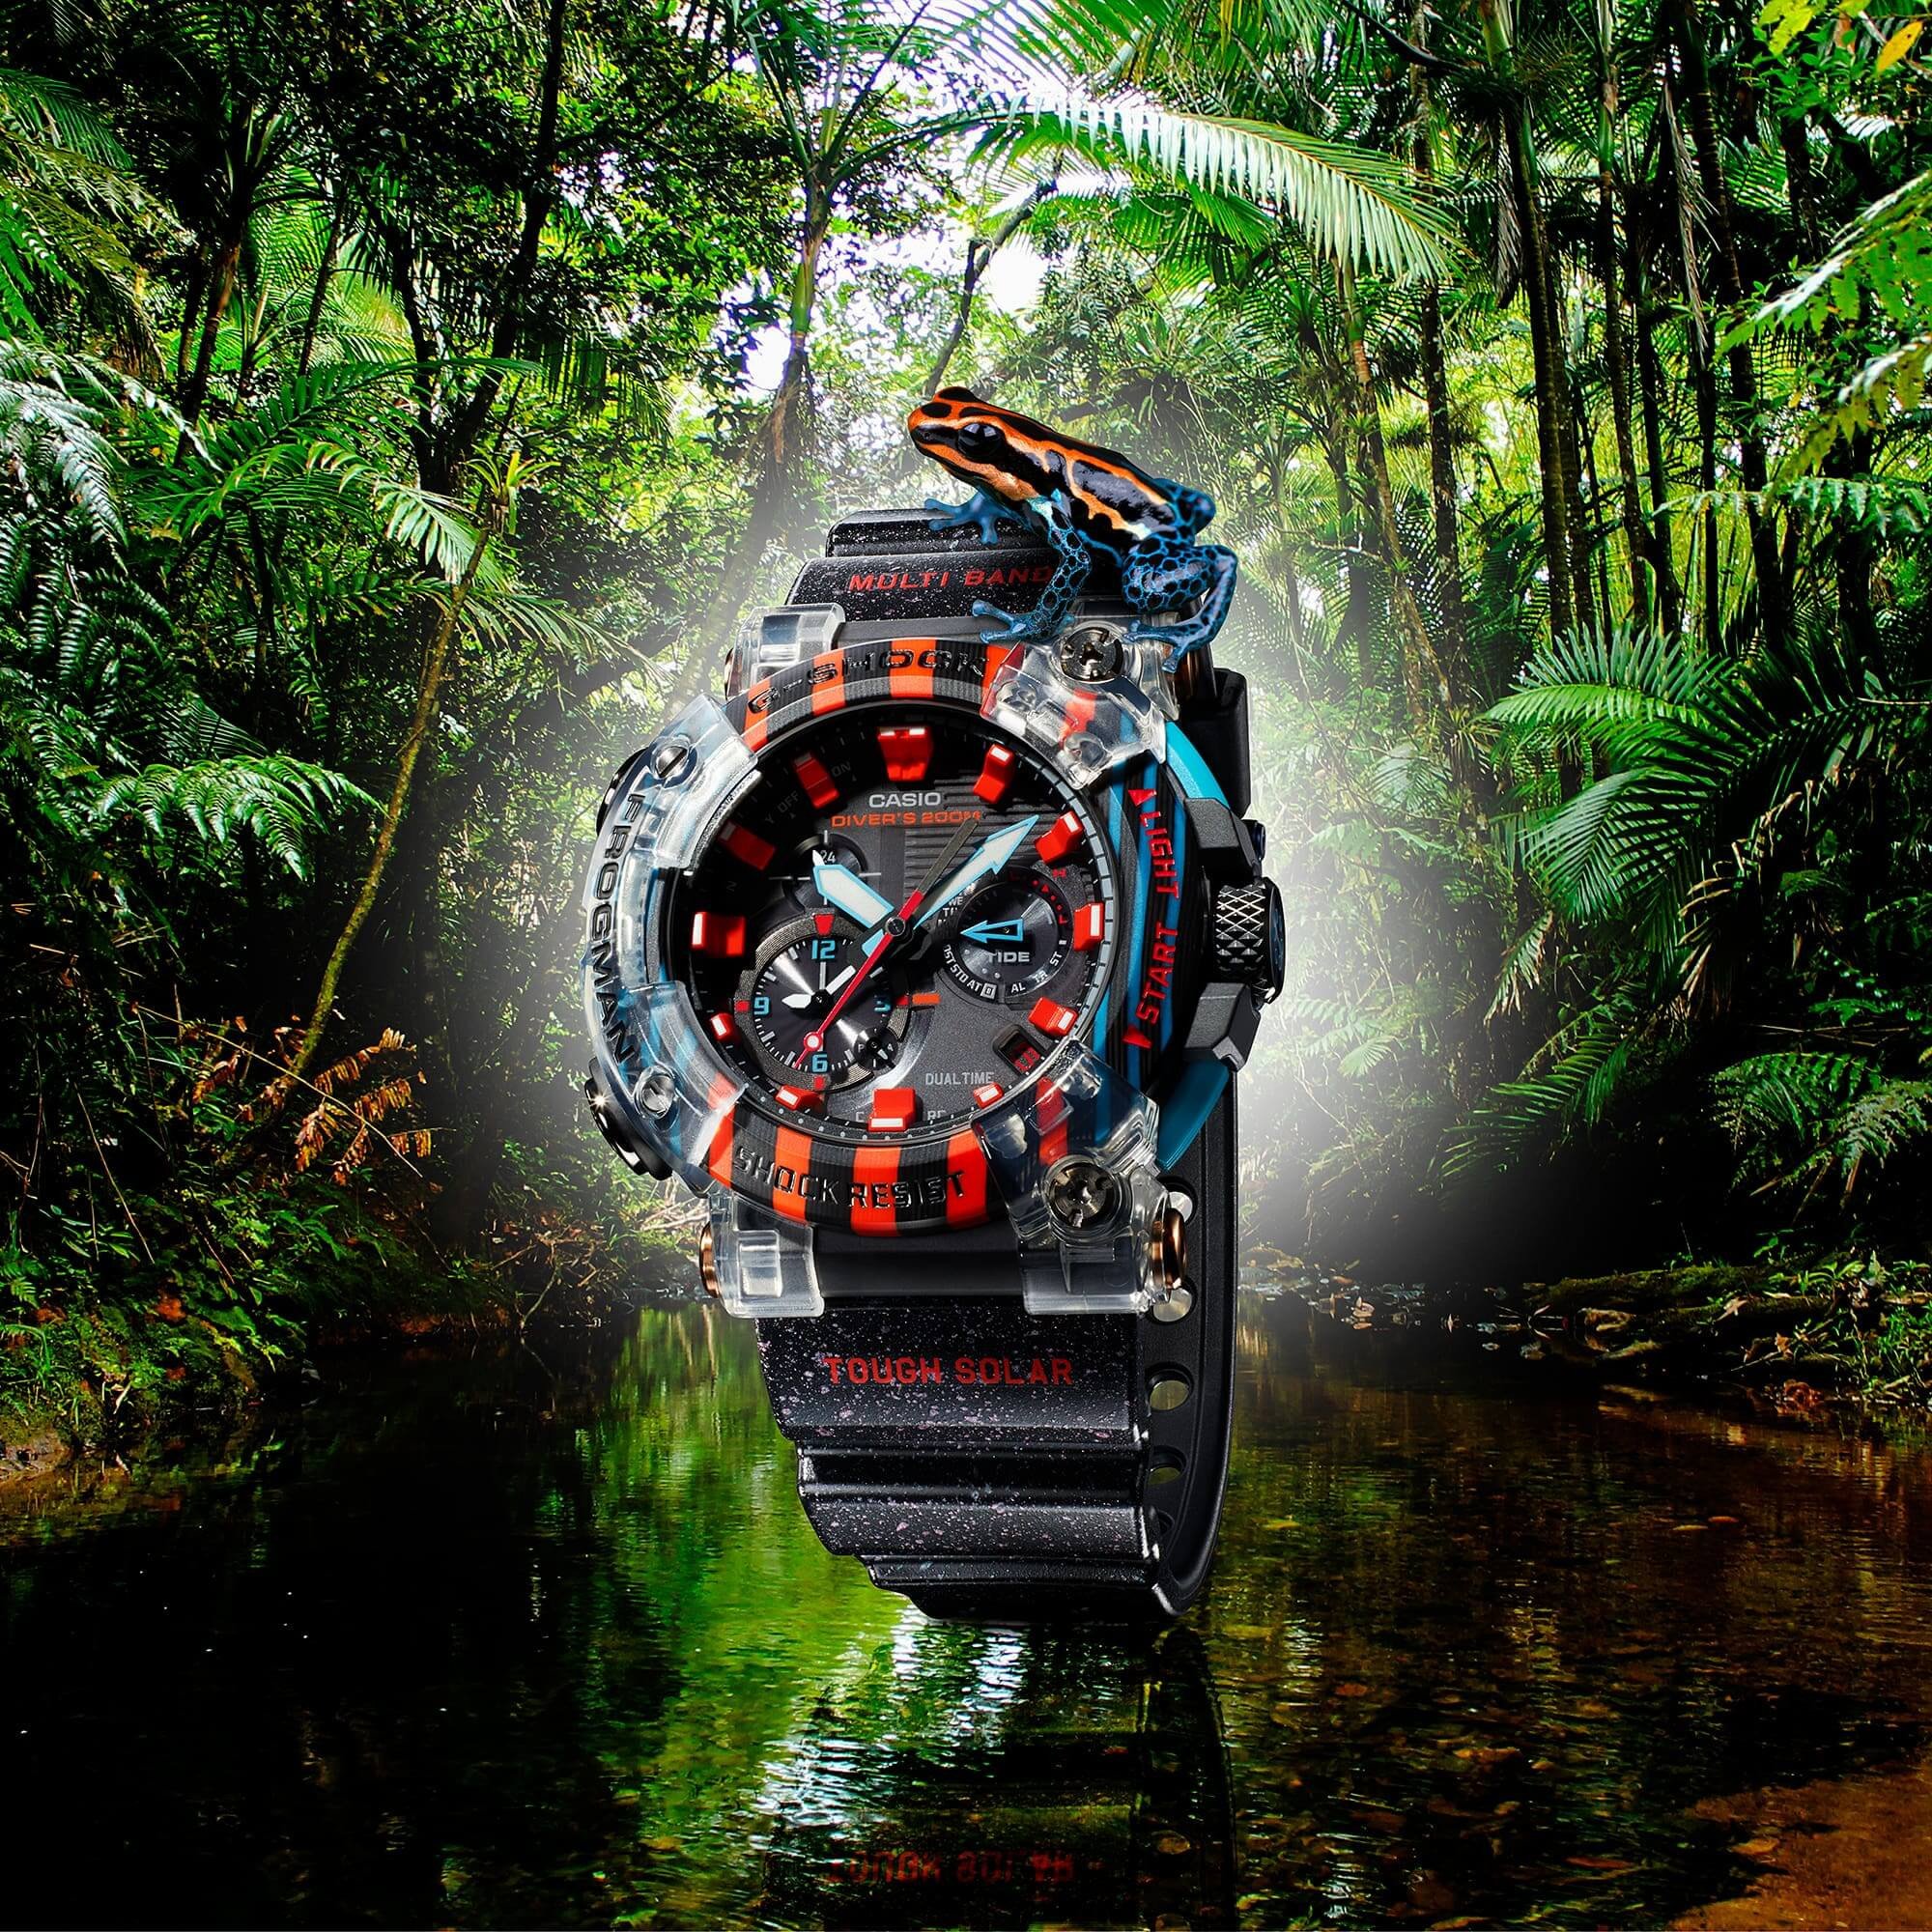 G-Shock Leaps Into The Spotlight With The Limited Edition Frogman